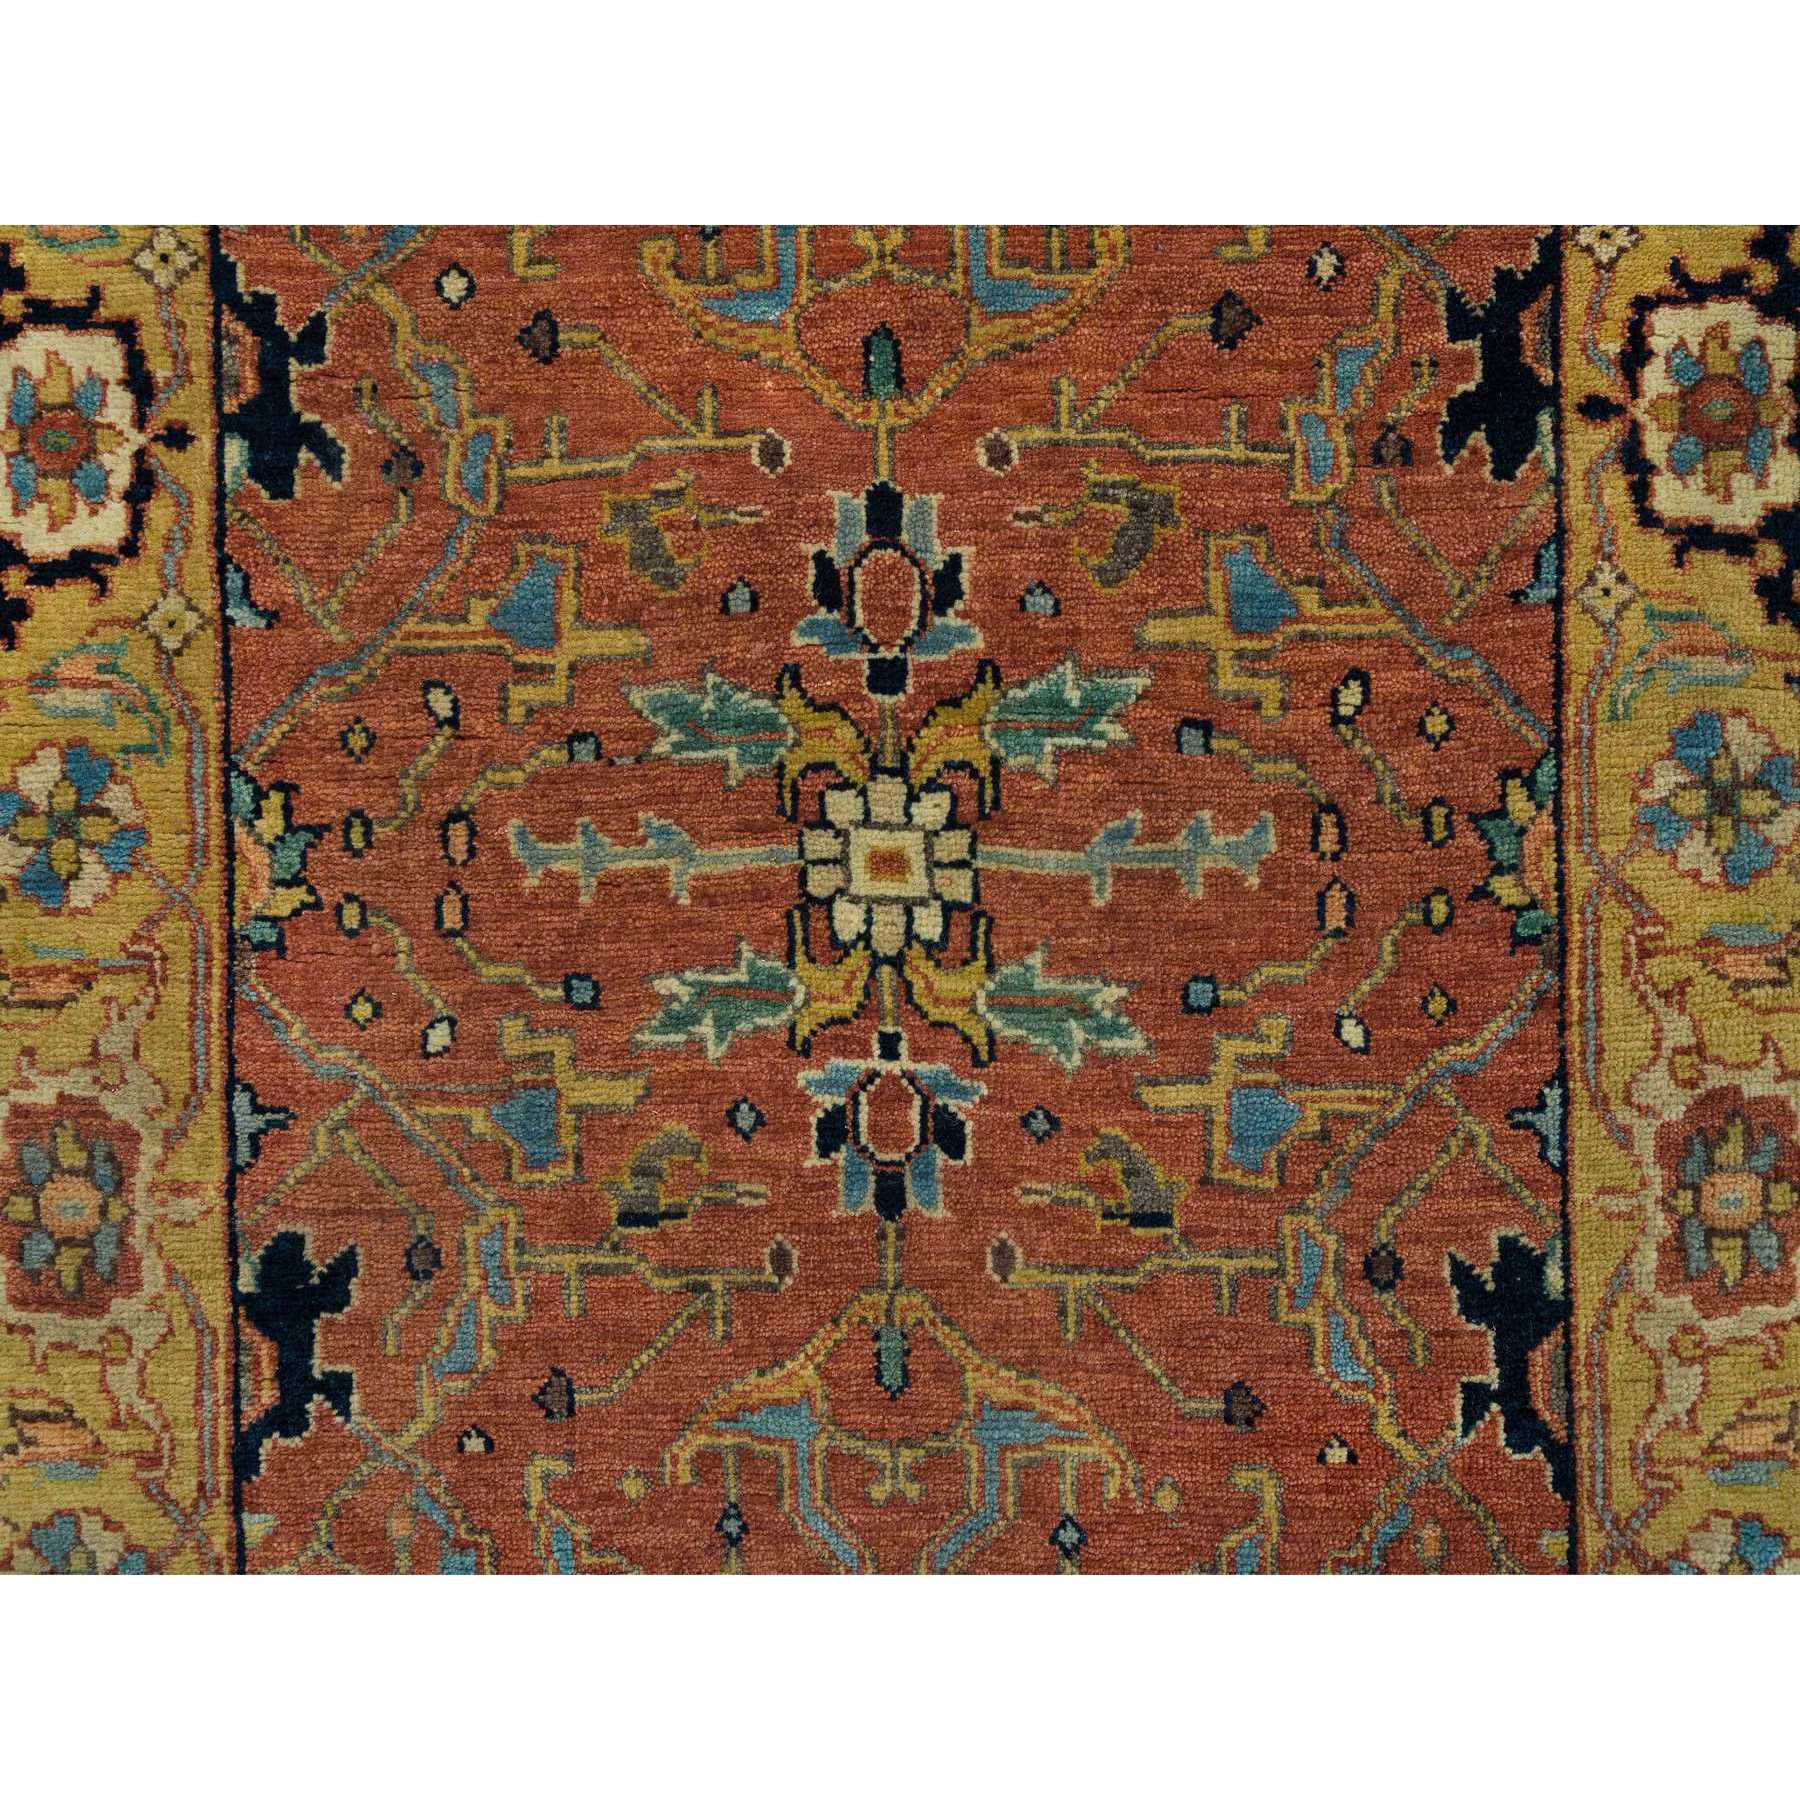 2'5"x6'1" Terracotta Red and Yellow, Soft and Plush, Antiqued Fine Heriz Re-Creation, Hand Woven, Pure Wool, Dense Weave, Runner Oriental Rug 